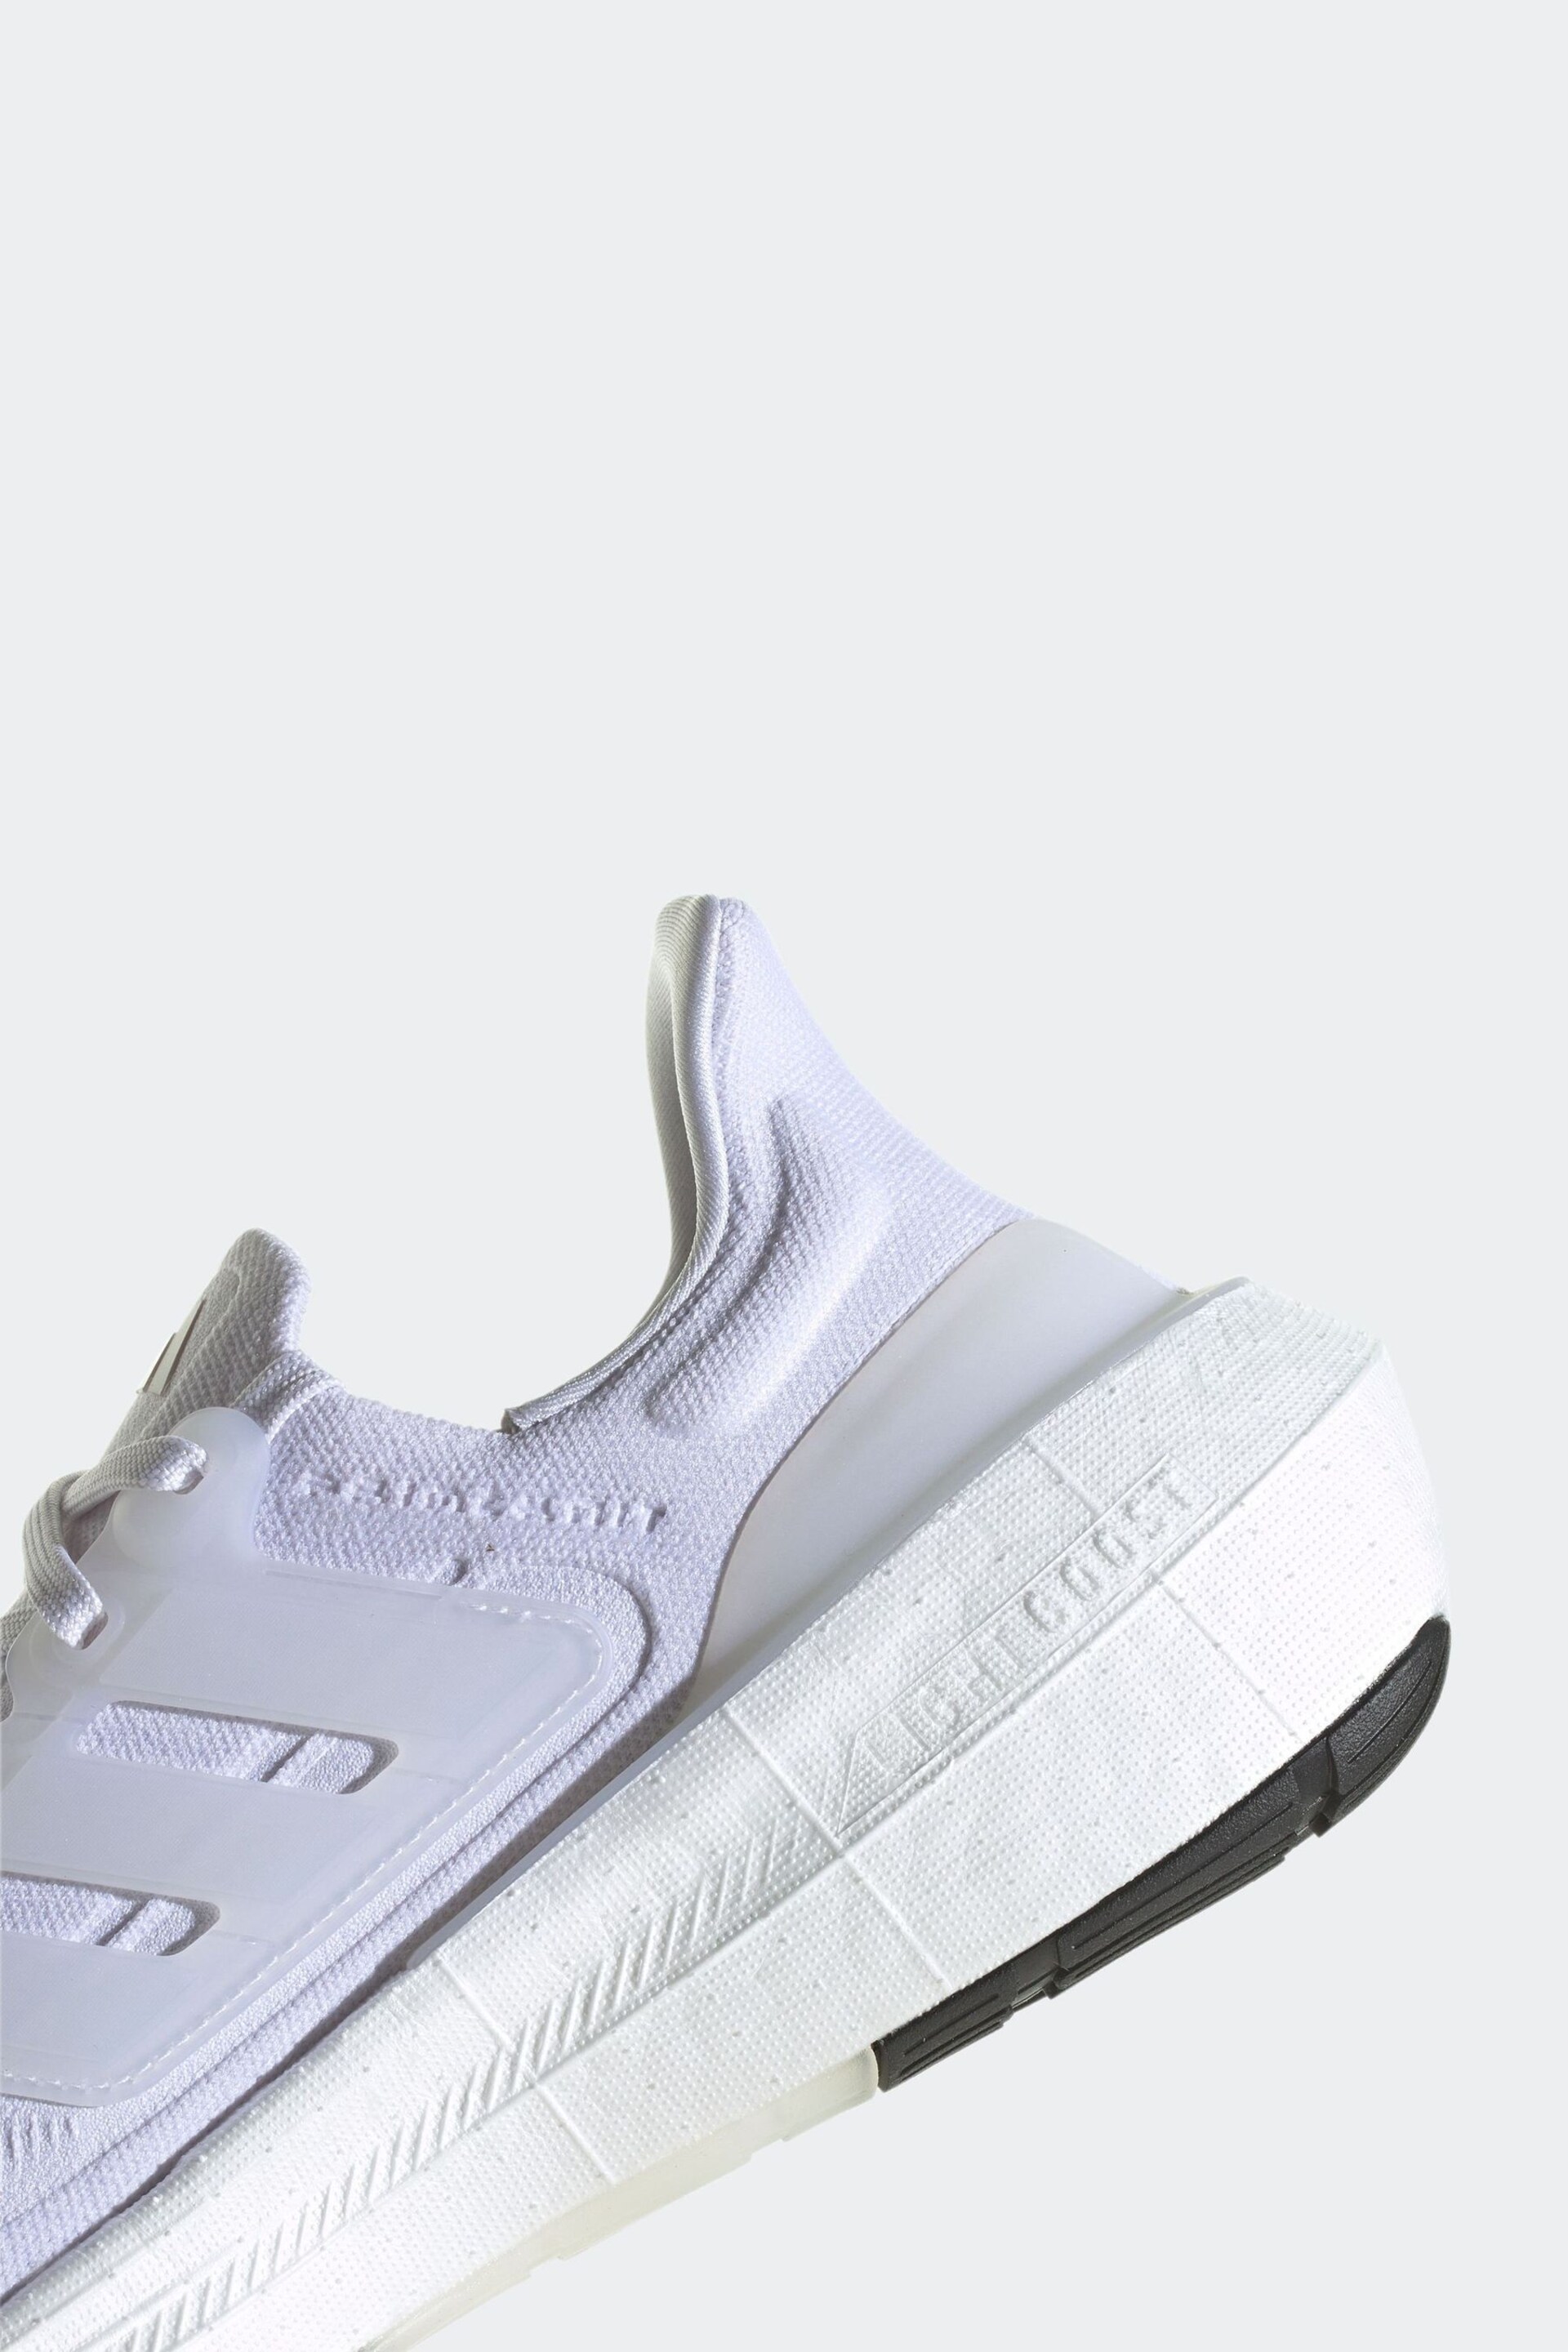 adidas White Ultraboost Light Trainers - Image 10 of 12